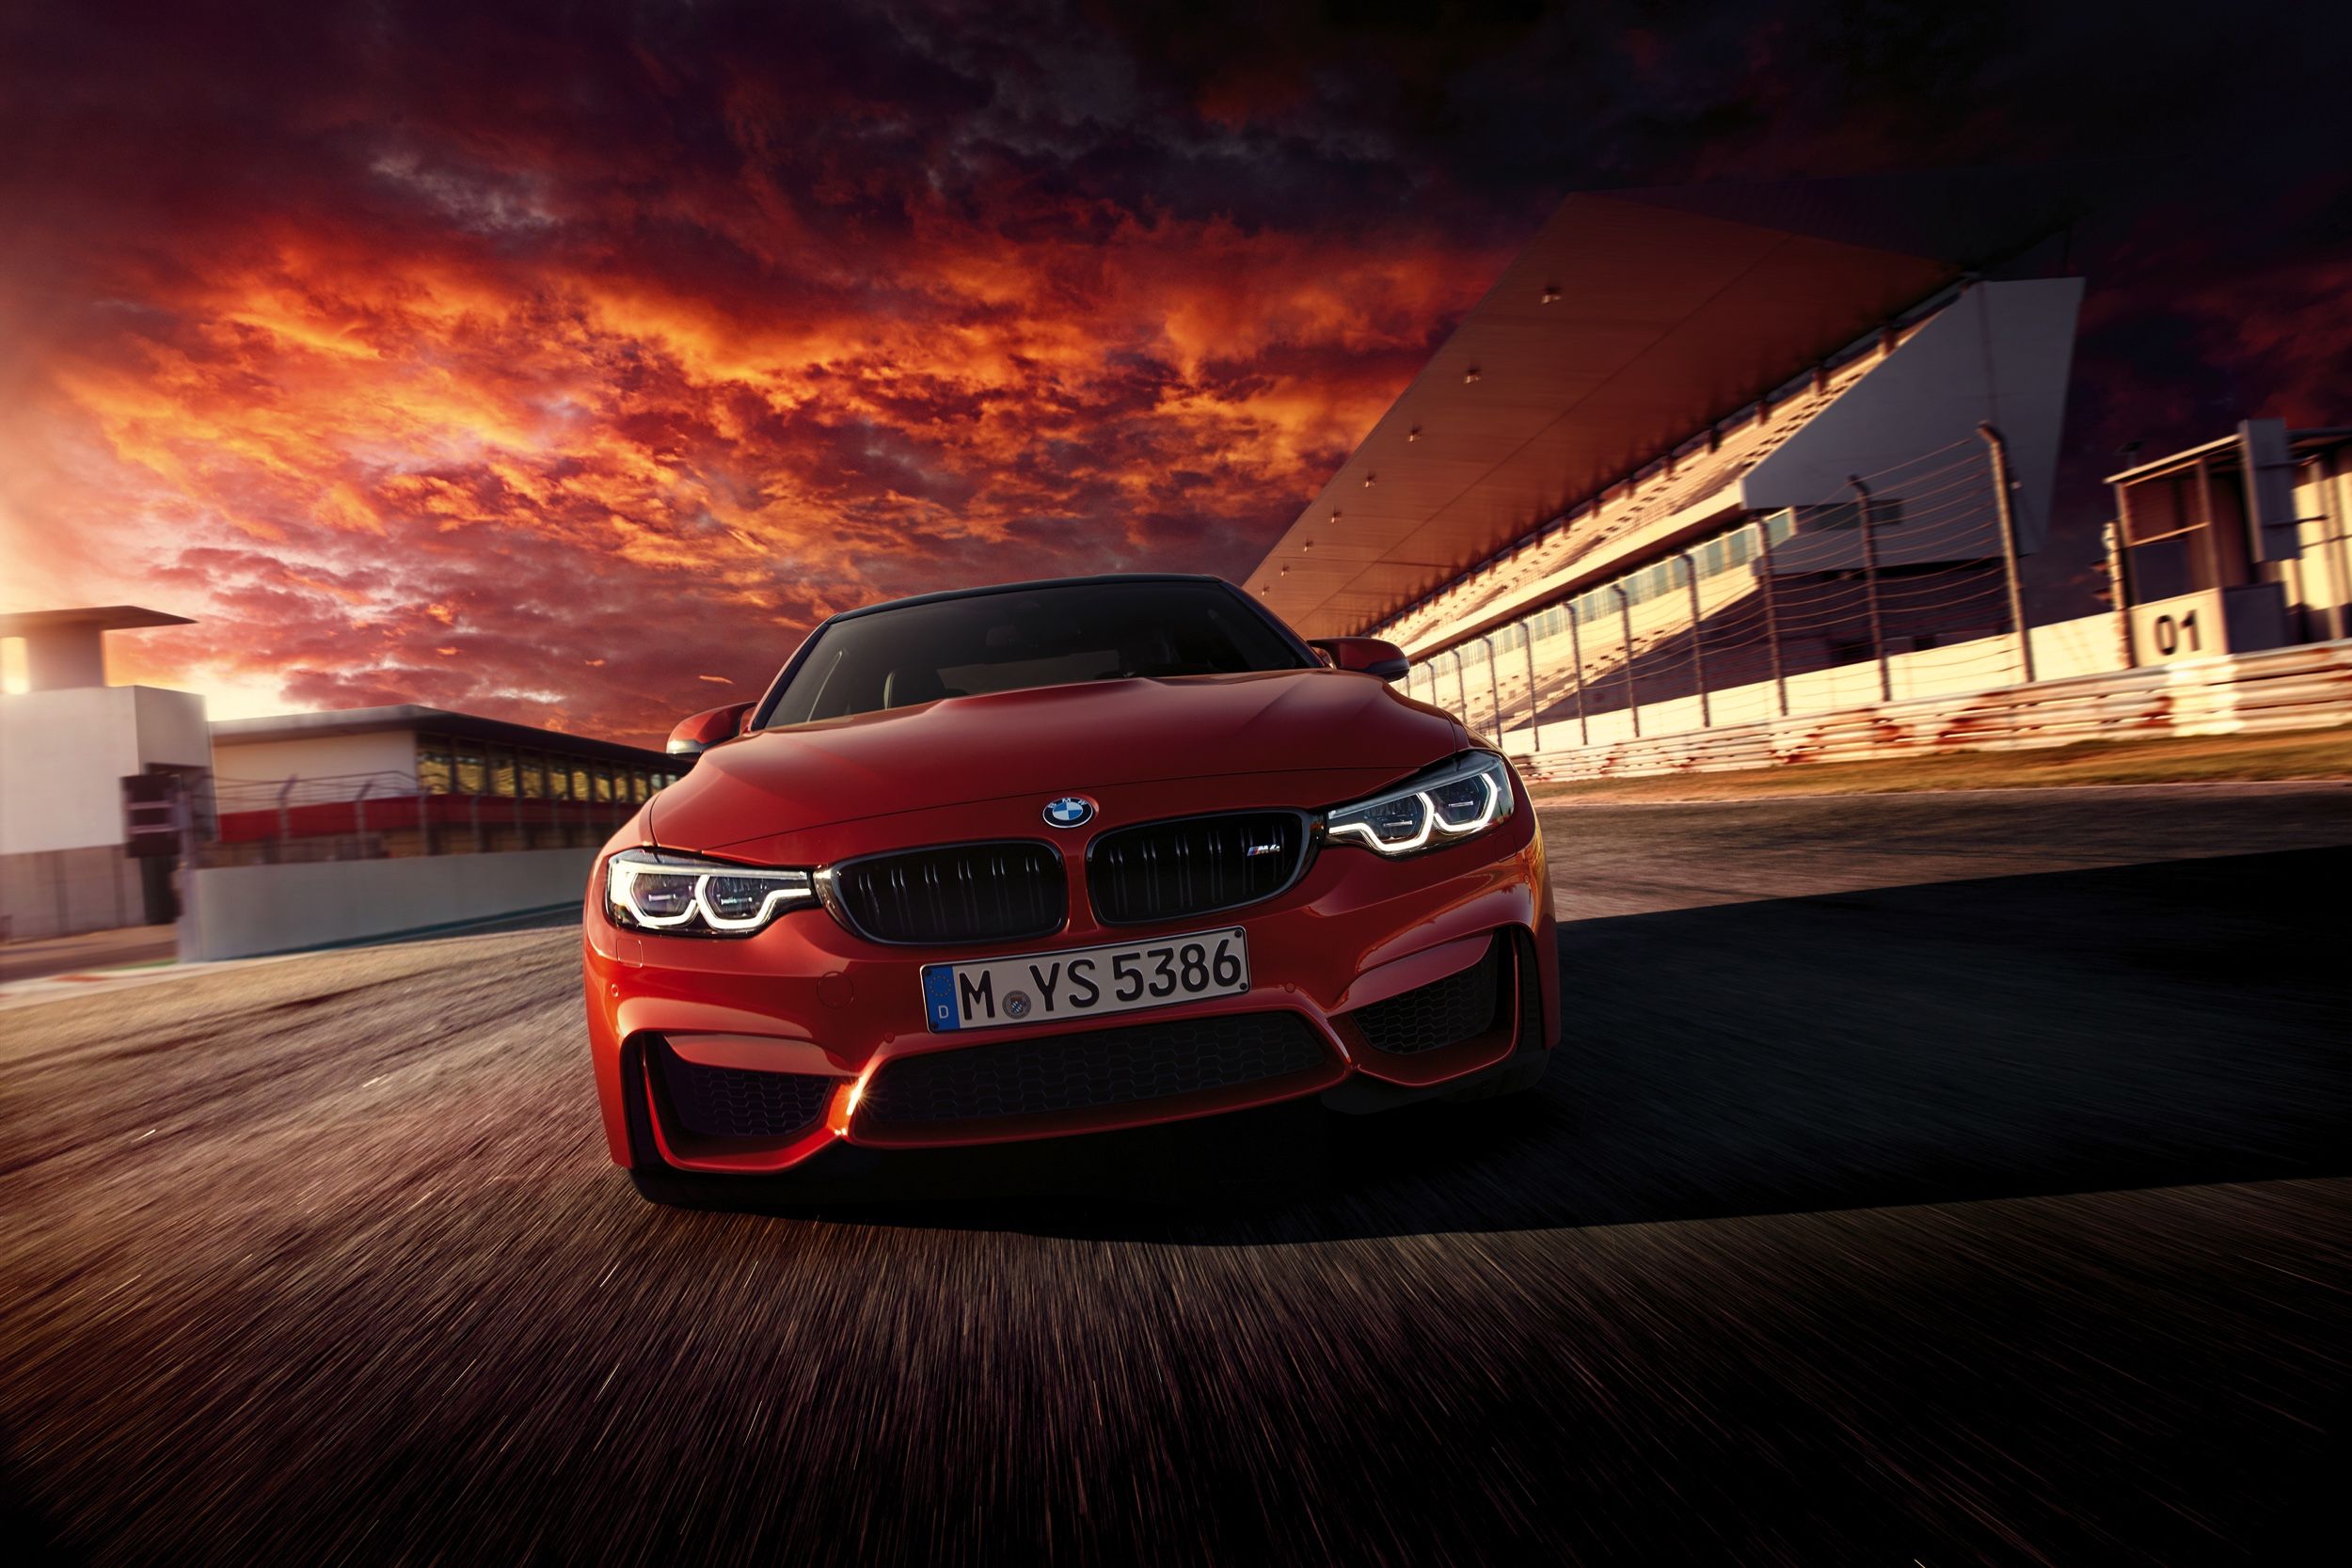 Download Bmw wallpapers for mobile phone free Bmw HD pictures